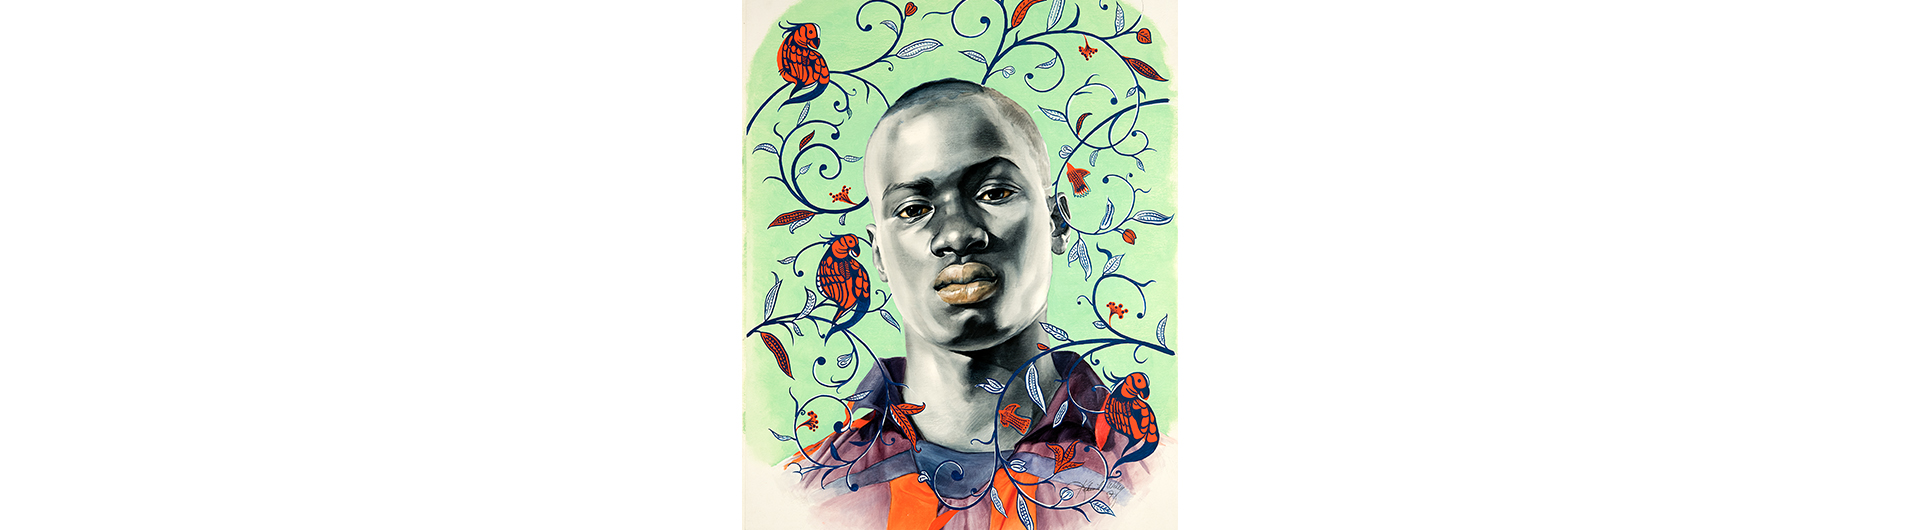 Kehinde Wiley (b. 1977). "Matar Mbaye (Study I)", 2007. Oil wash on paper. Sheet: 30 x 23 in. Museum purchase; Acquisition Fund, 2018.7.